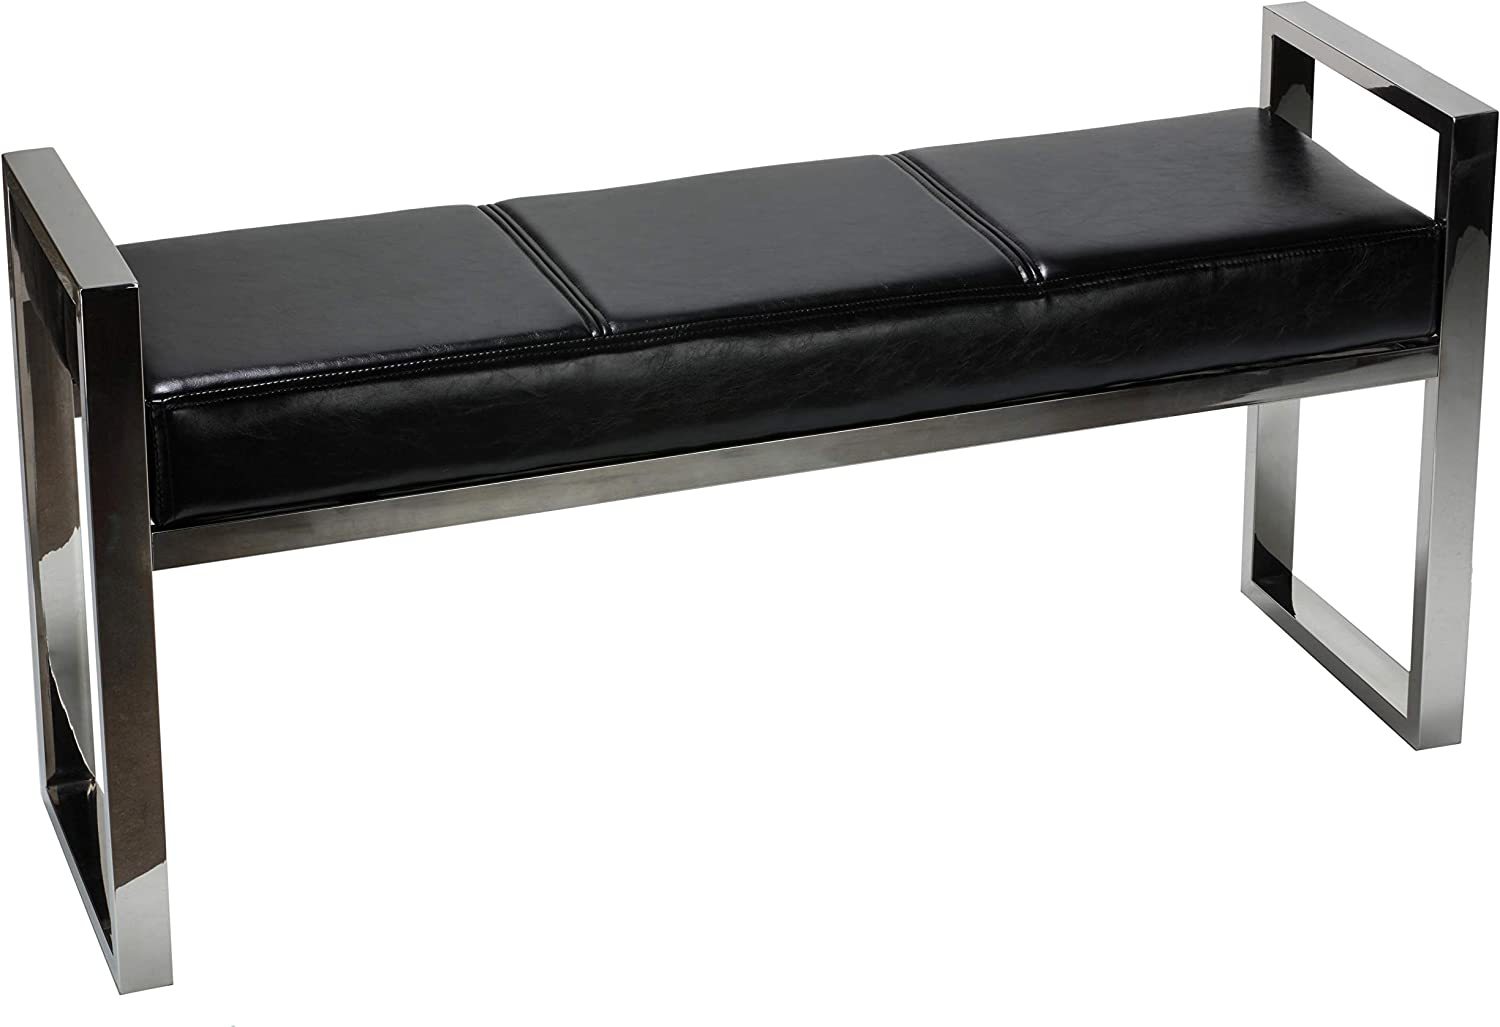 Primary image for Cortesi Home Holden Modern Metal Entryway Bench, 40", Black.